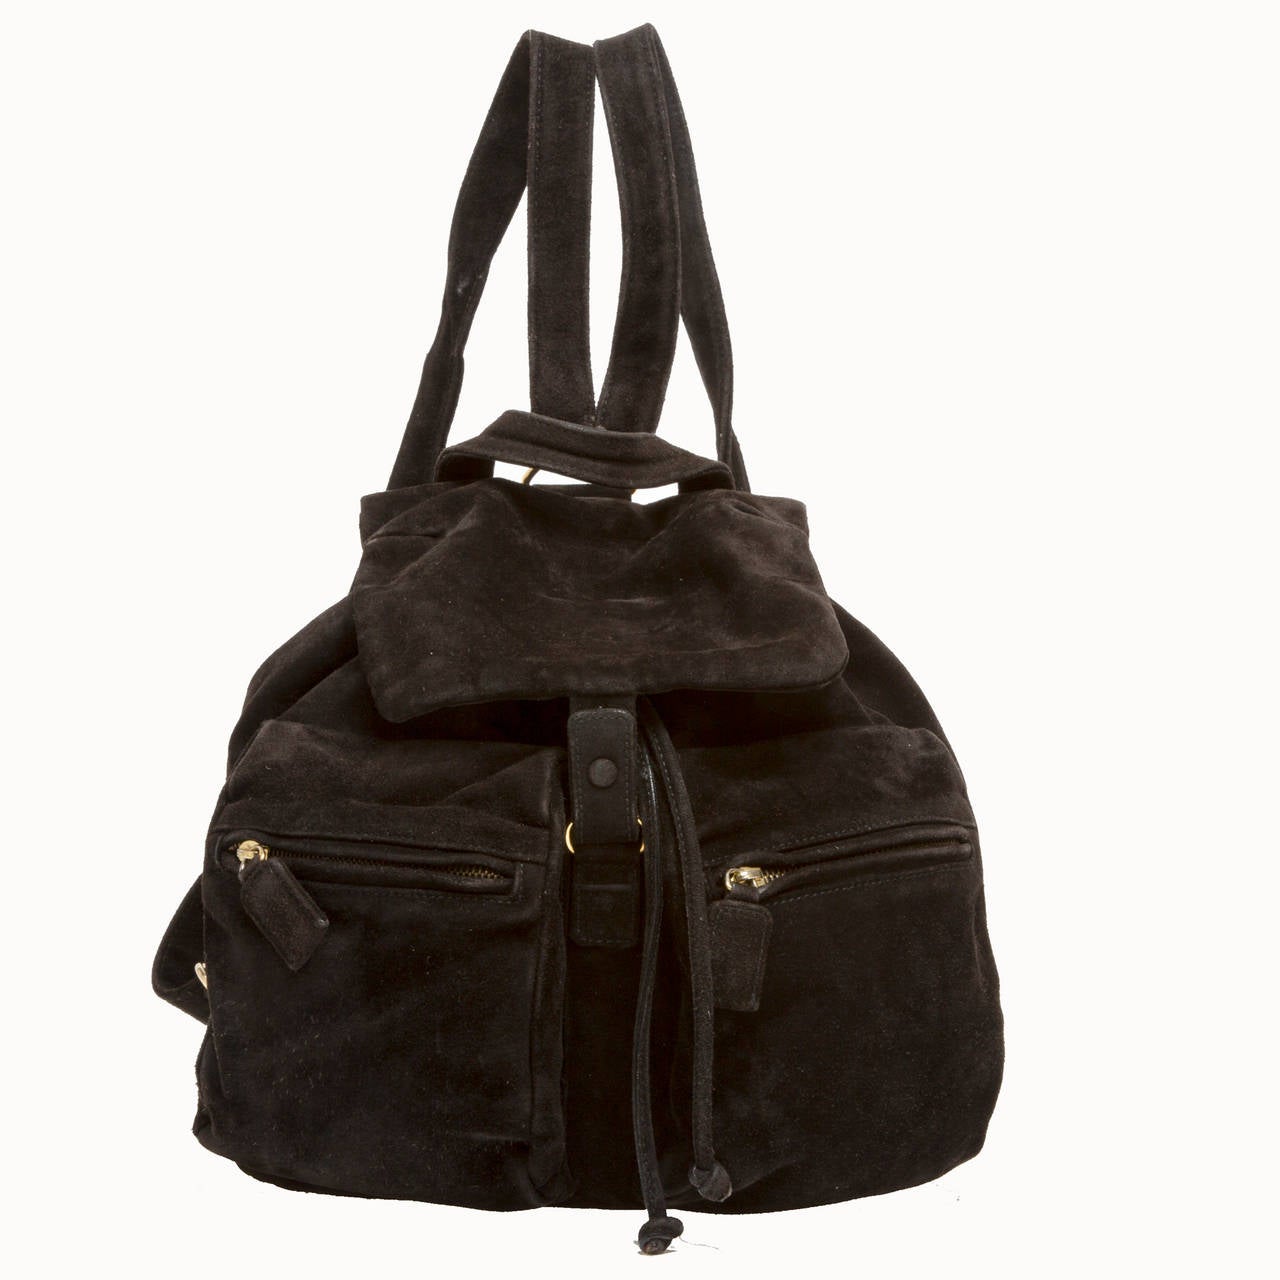 This authentic Prada Zip Pocket Backpack made of black suede is practical yet chic featuring two small front zip pockets for easy-to-reach items and adjustable shoulder straps. The main compartment is closed securely with a wrap around and snap